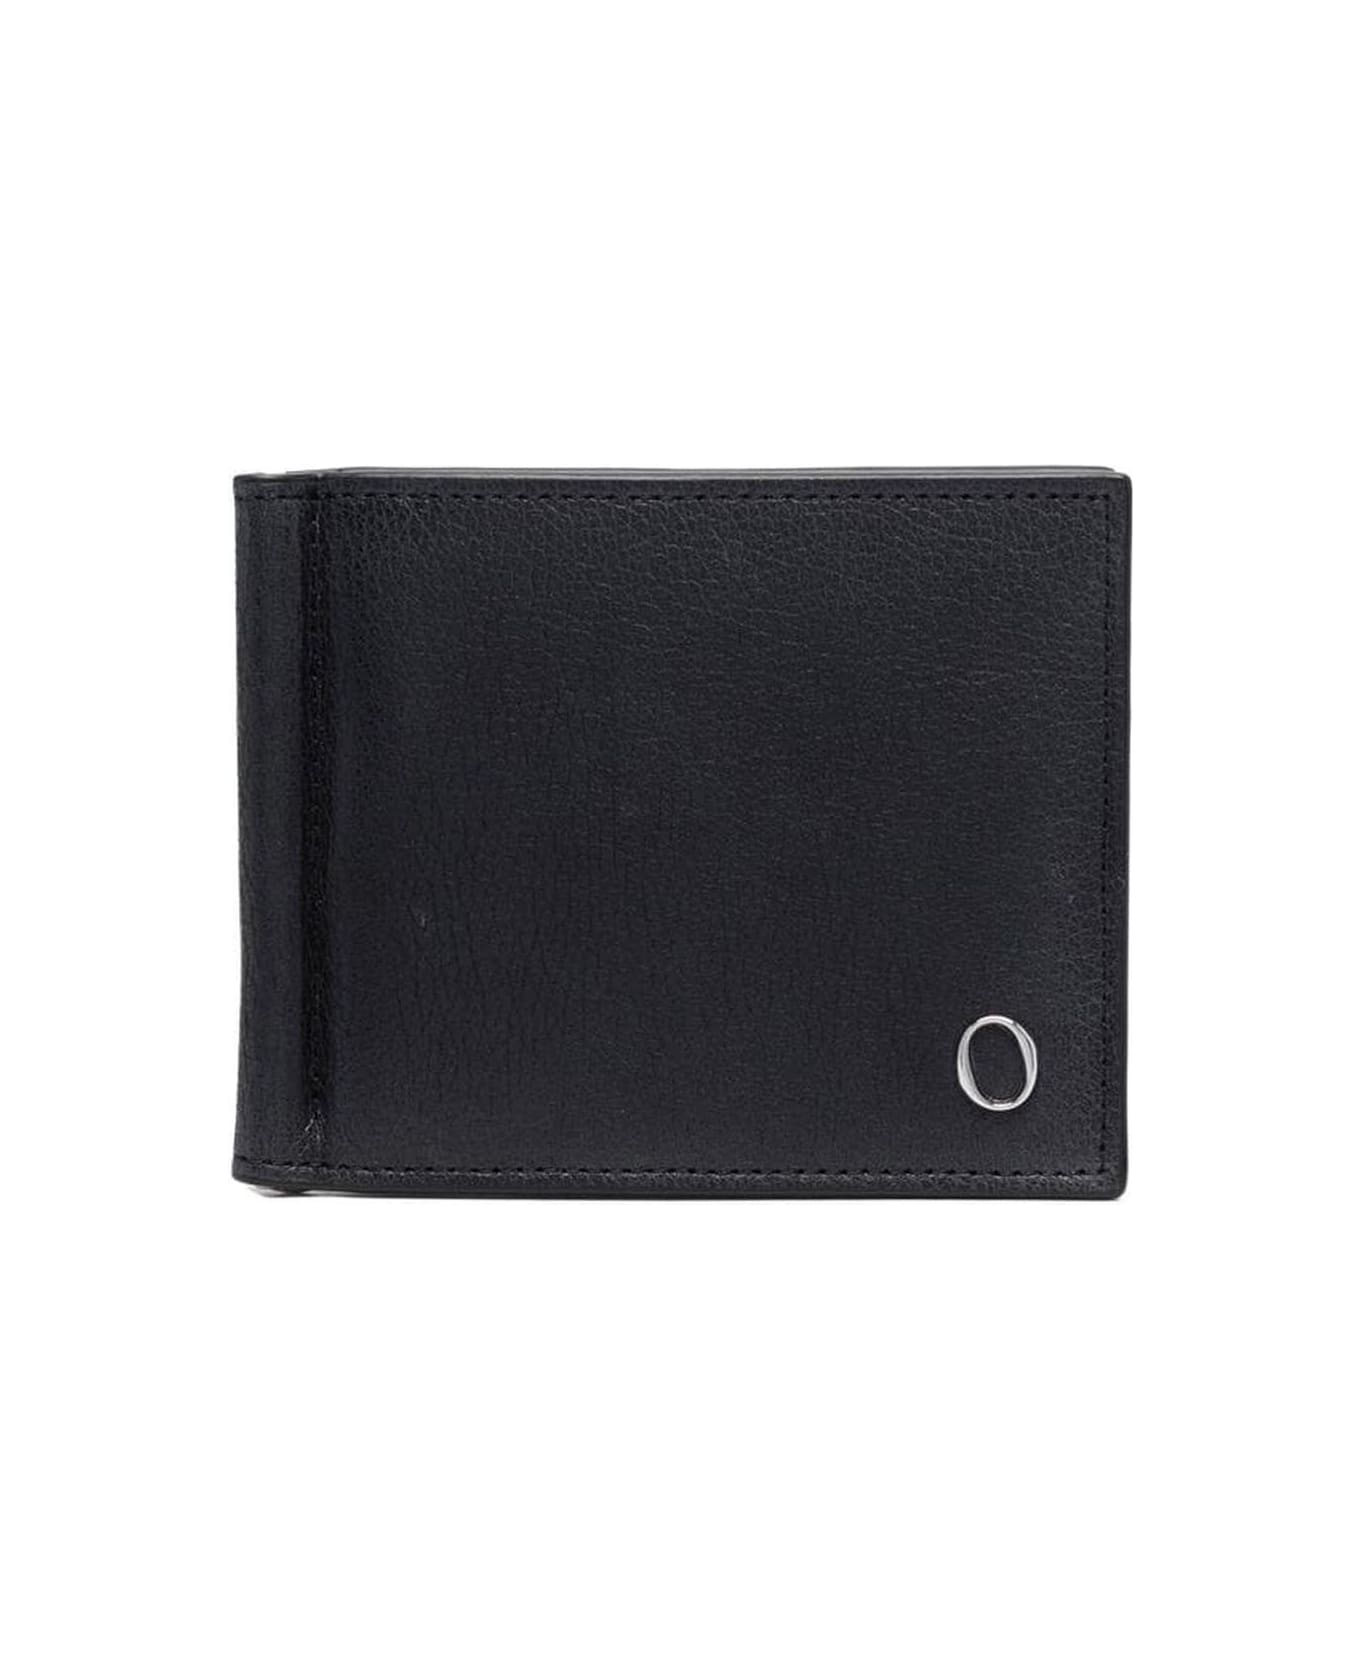 Orciani Black Calf Leather Wallet - Black